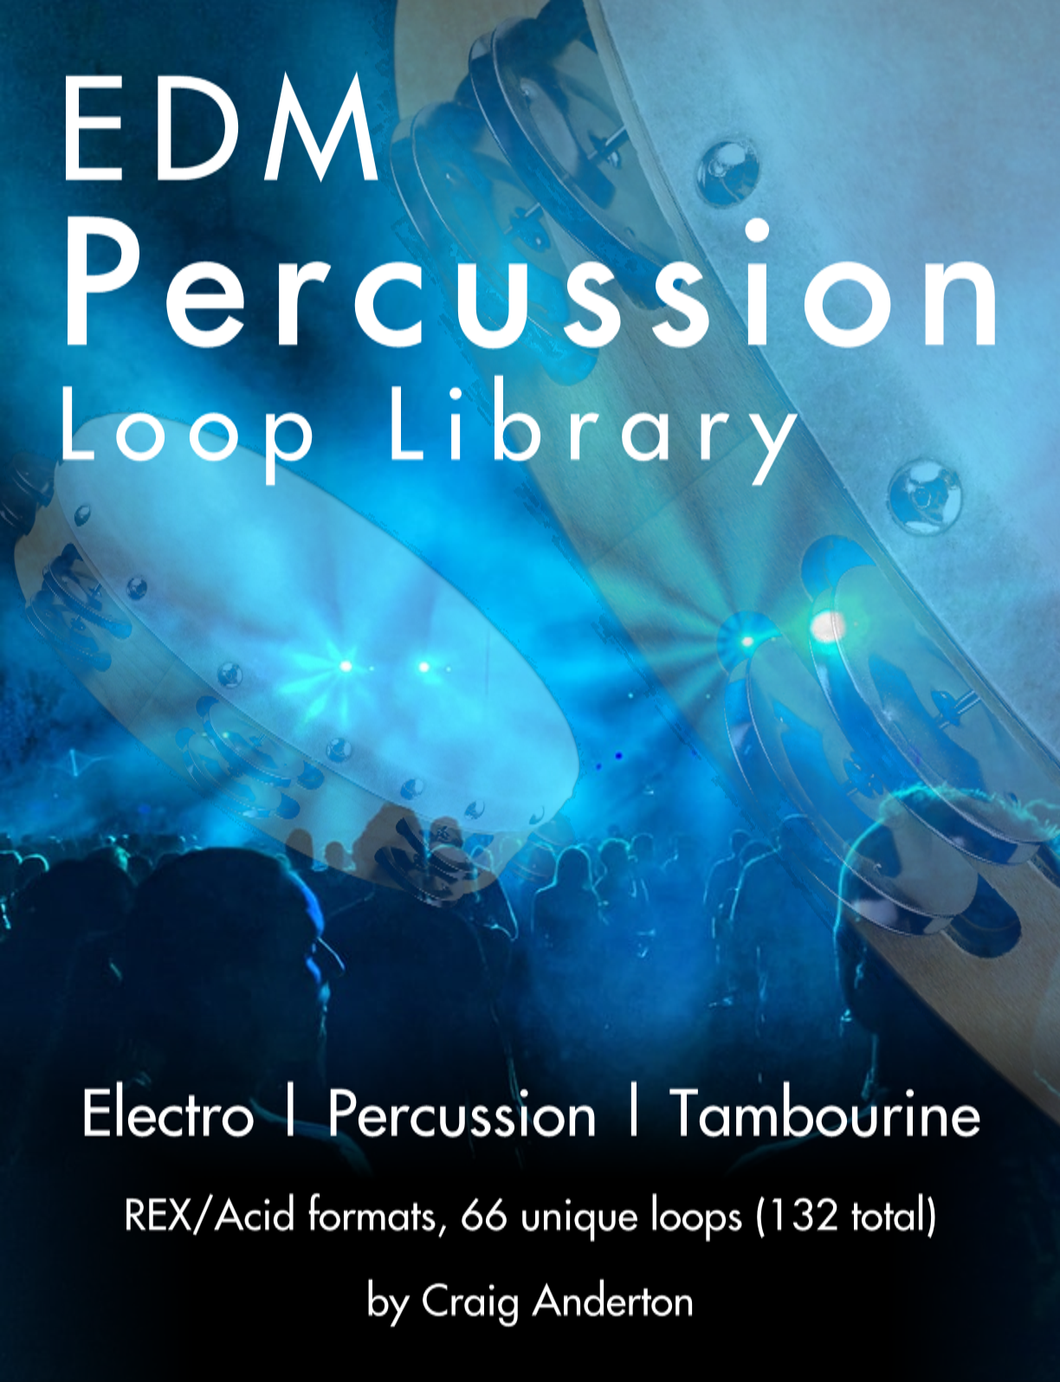 EDM Percussion Loop Library